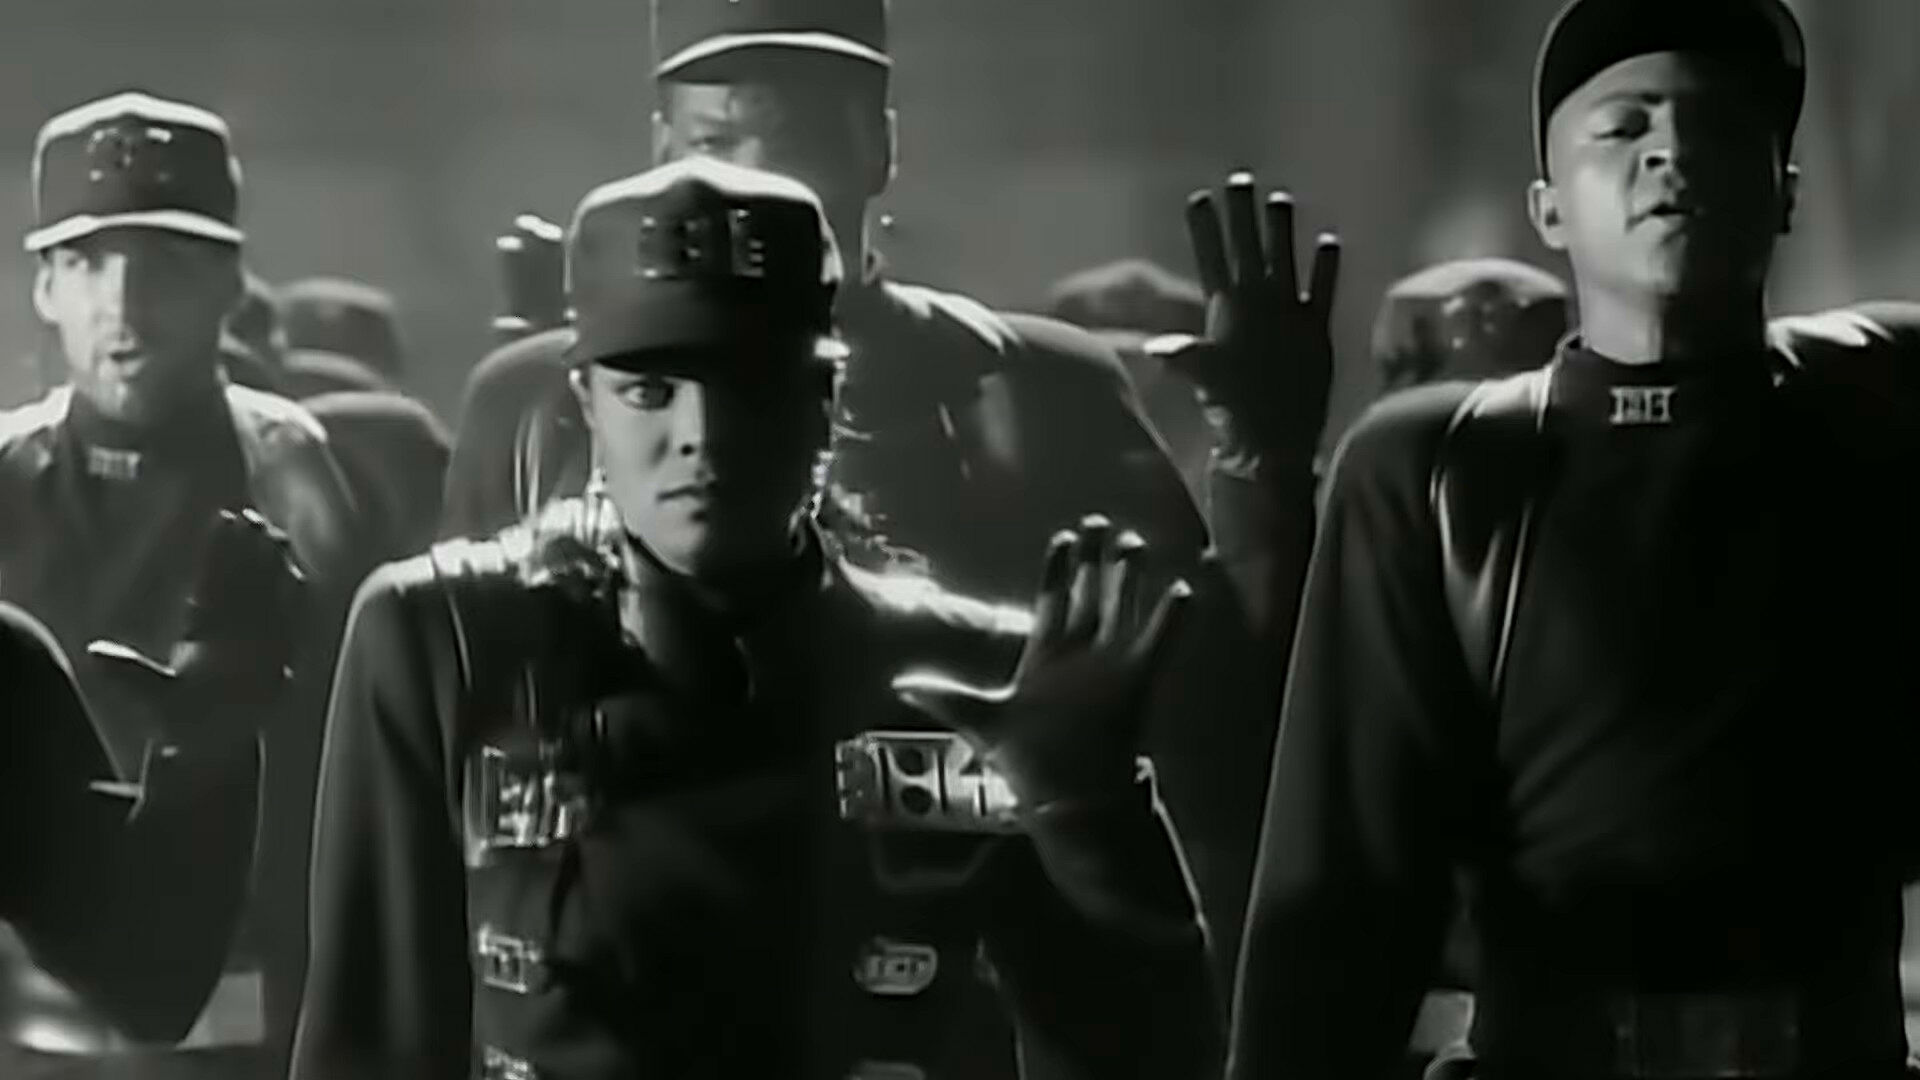 A Janet Jackson song had an uncanny power to crash laptops